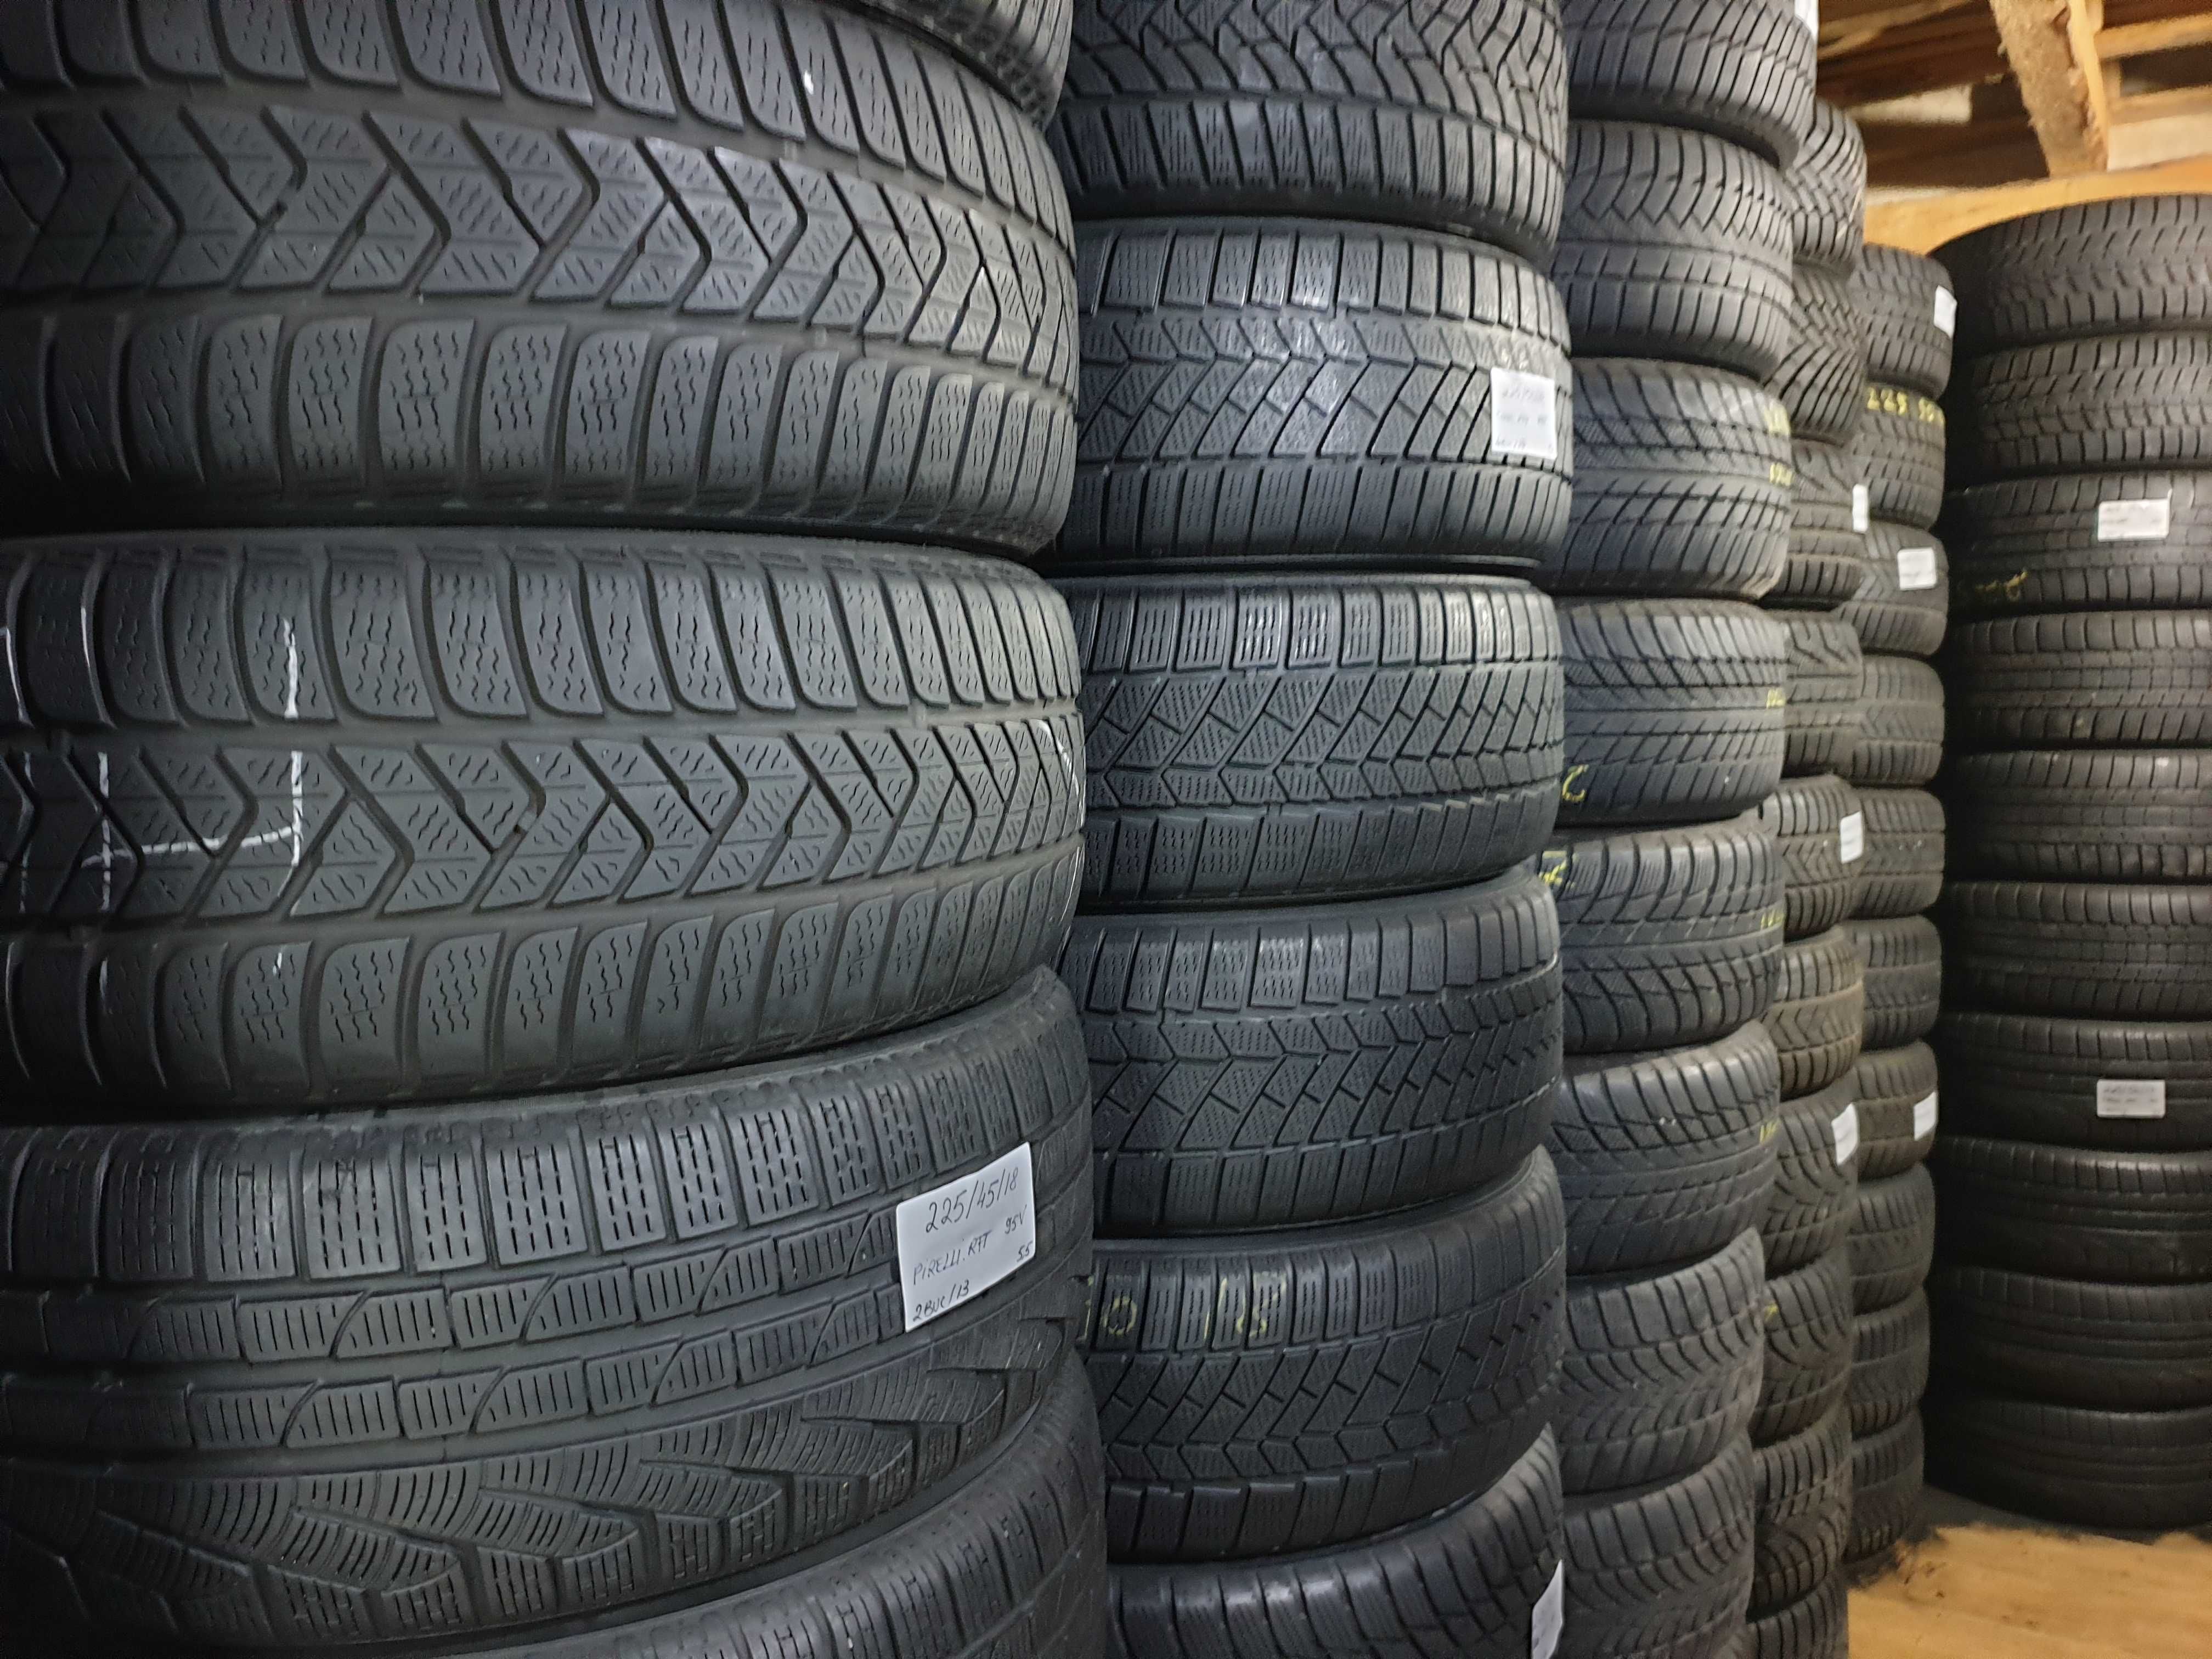 Anvelope Second Hand Continental Vara-265/40 R21 105Y,in stoc R19/20